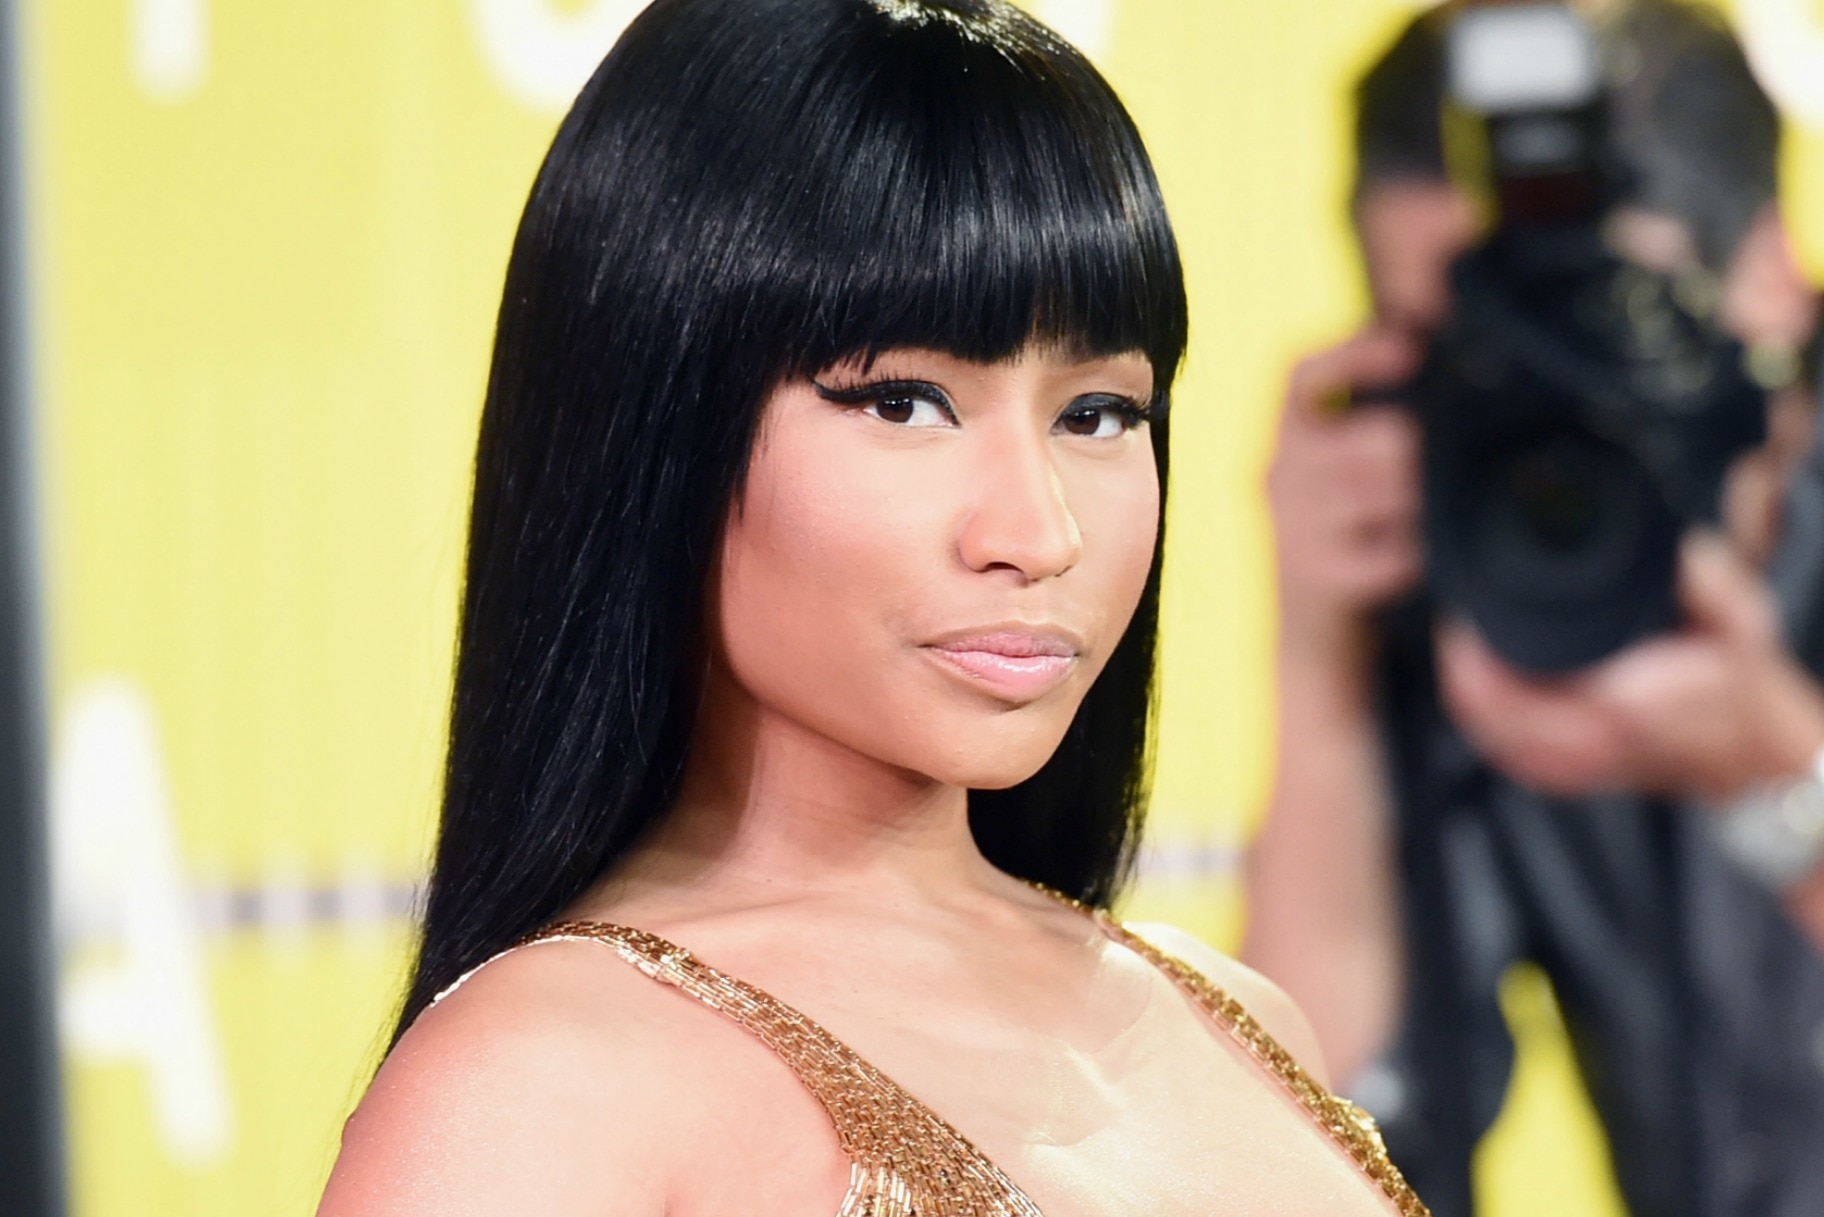 Nicki Minaj Reportedly Refused To Perform Without Getting Popeyes First. 